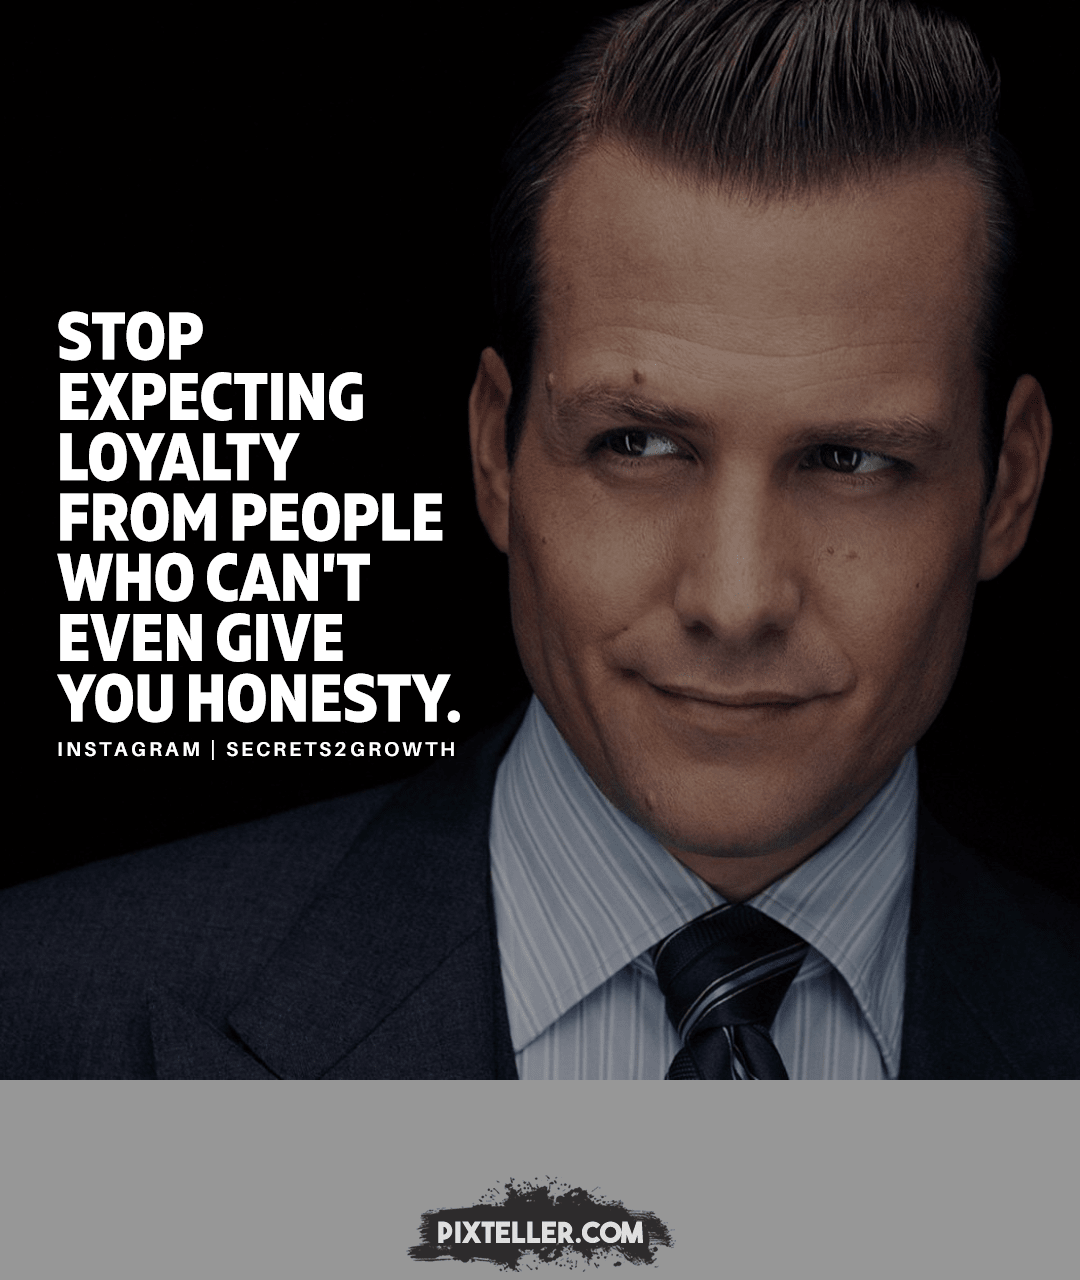 STOP EXPECTING LOYALTY FROM PEOPLE Design 